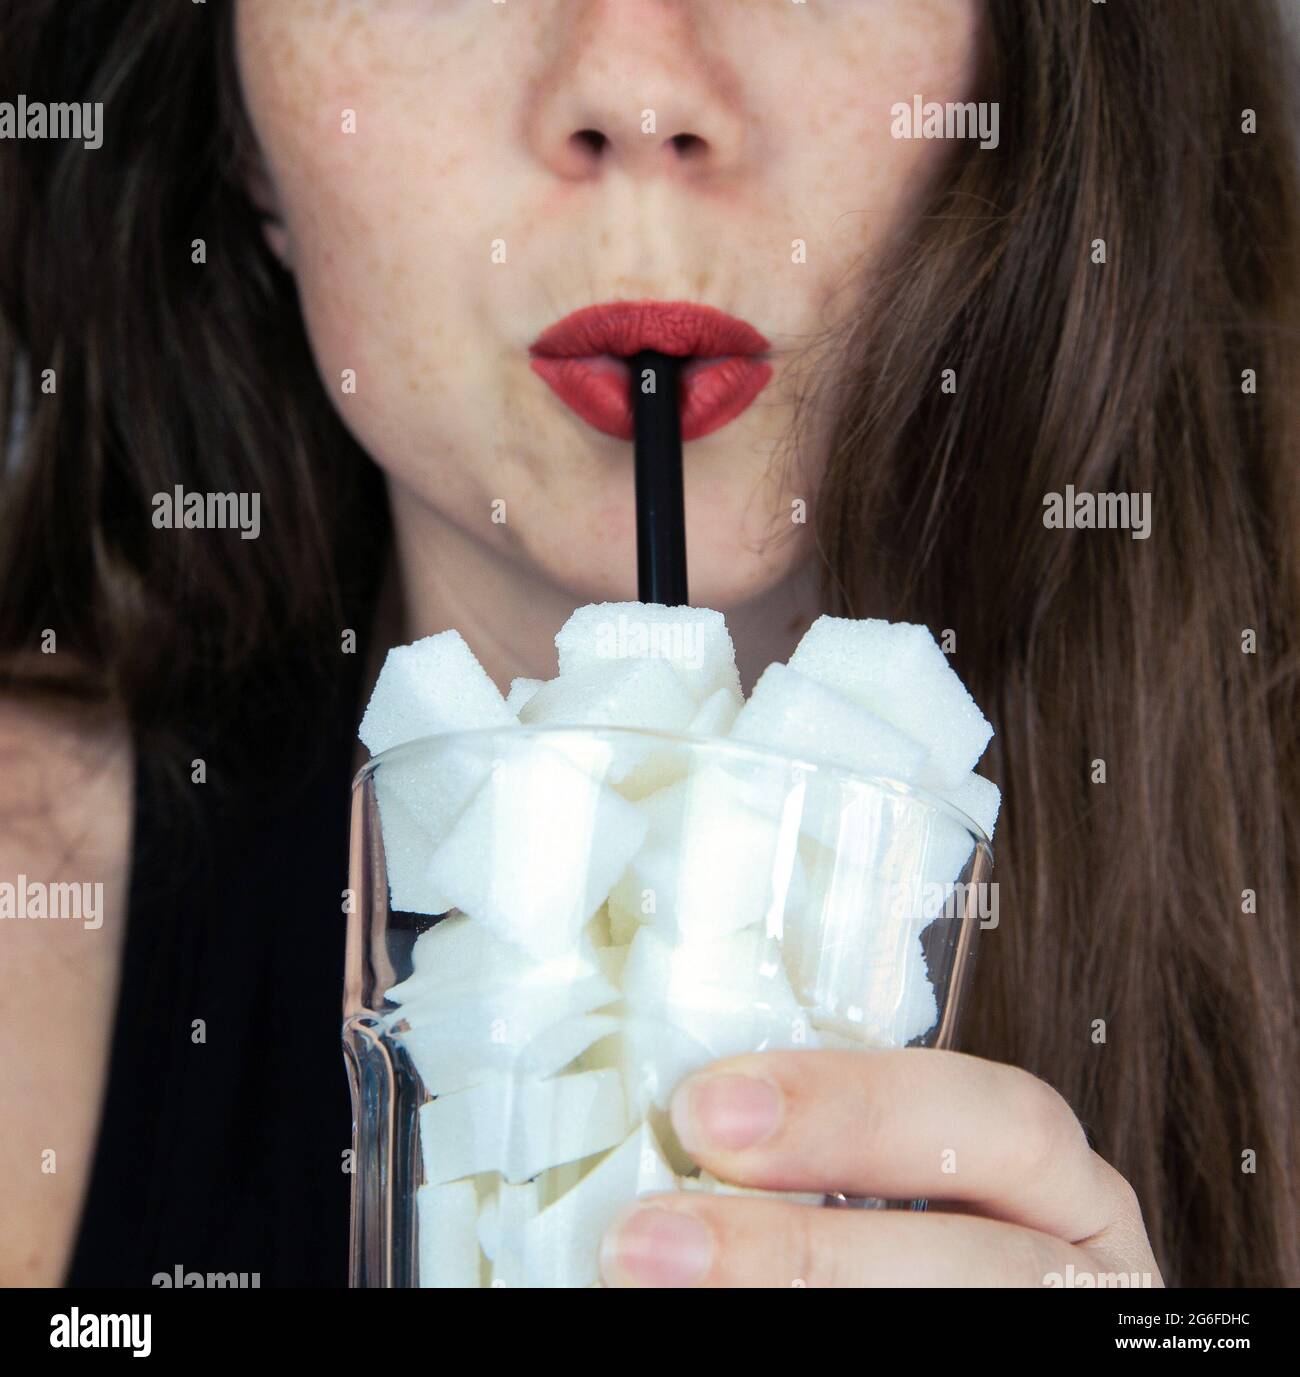 Portrait of young woman drinking with a black colored straw from a glass filled with sugar cubes Junk food, unhealthy diet, too much sugar on drinks, Stock Photo